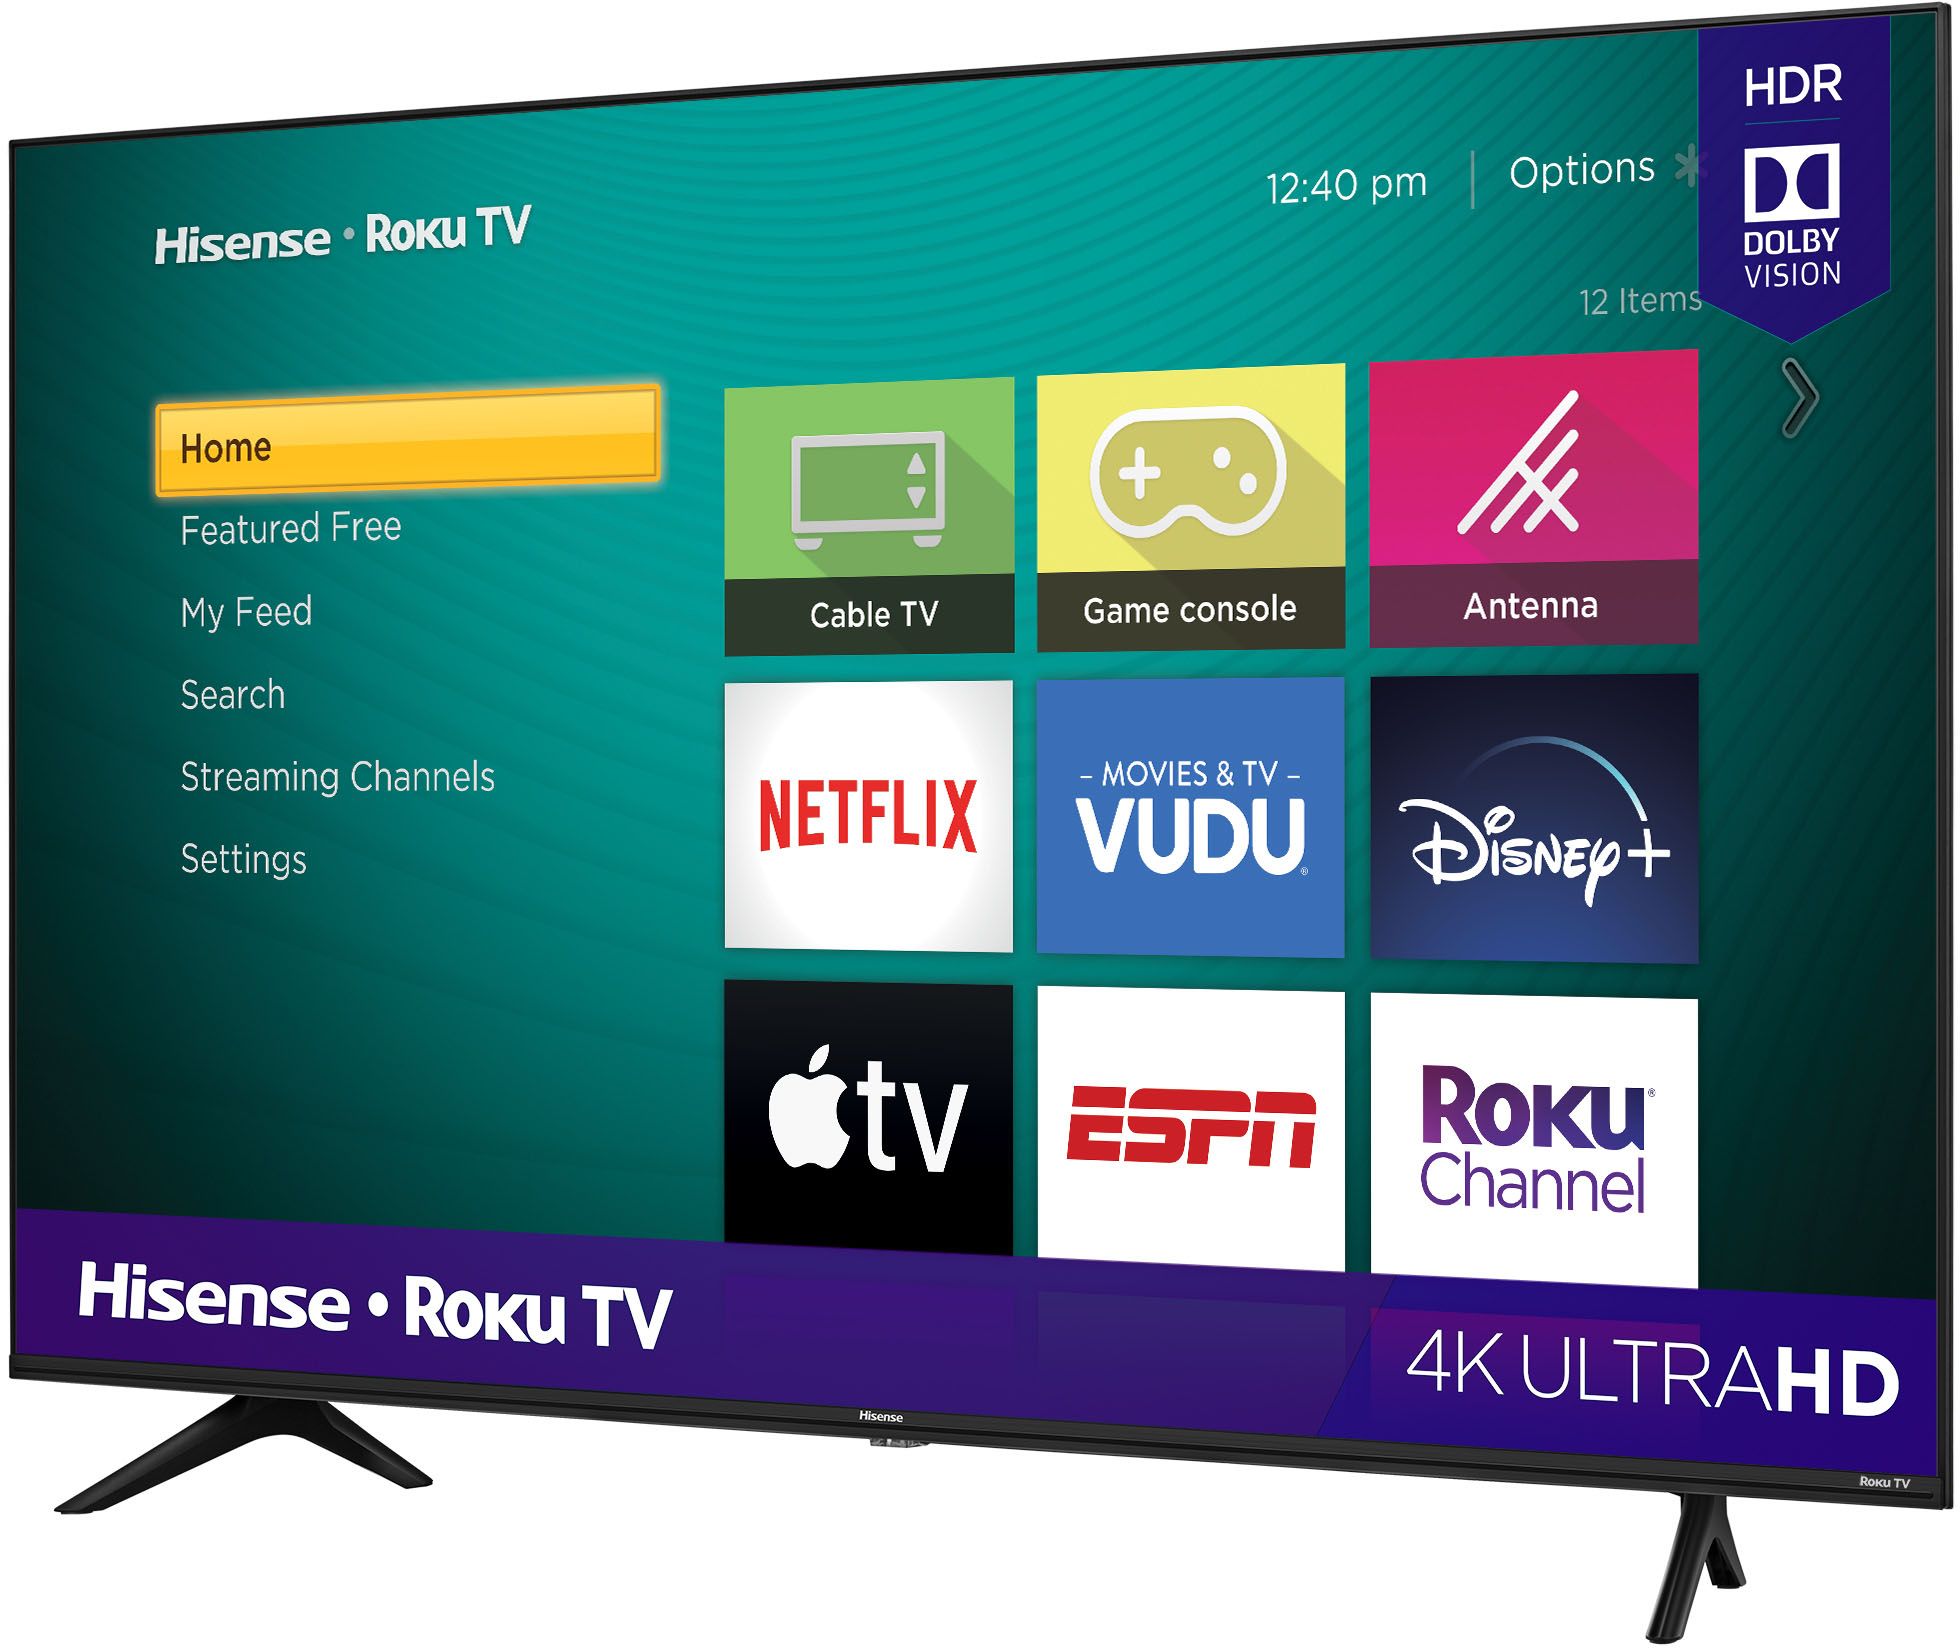 where-is-the-power-button-on-a-hisense-roku-tv